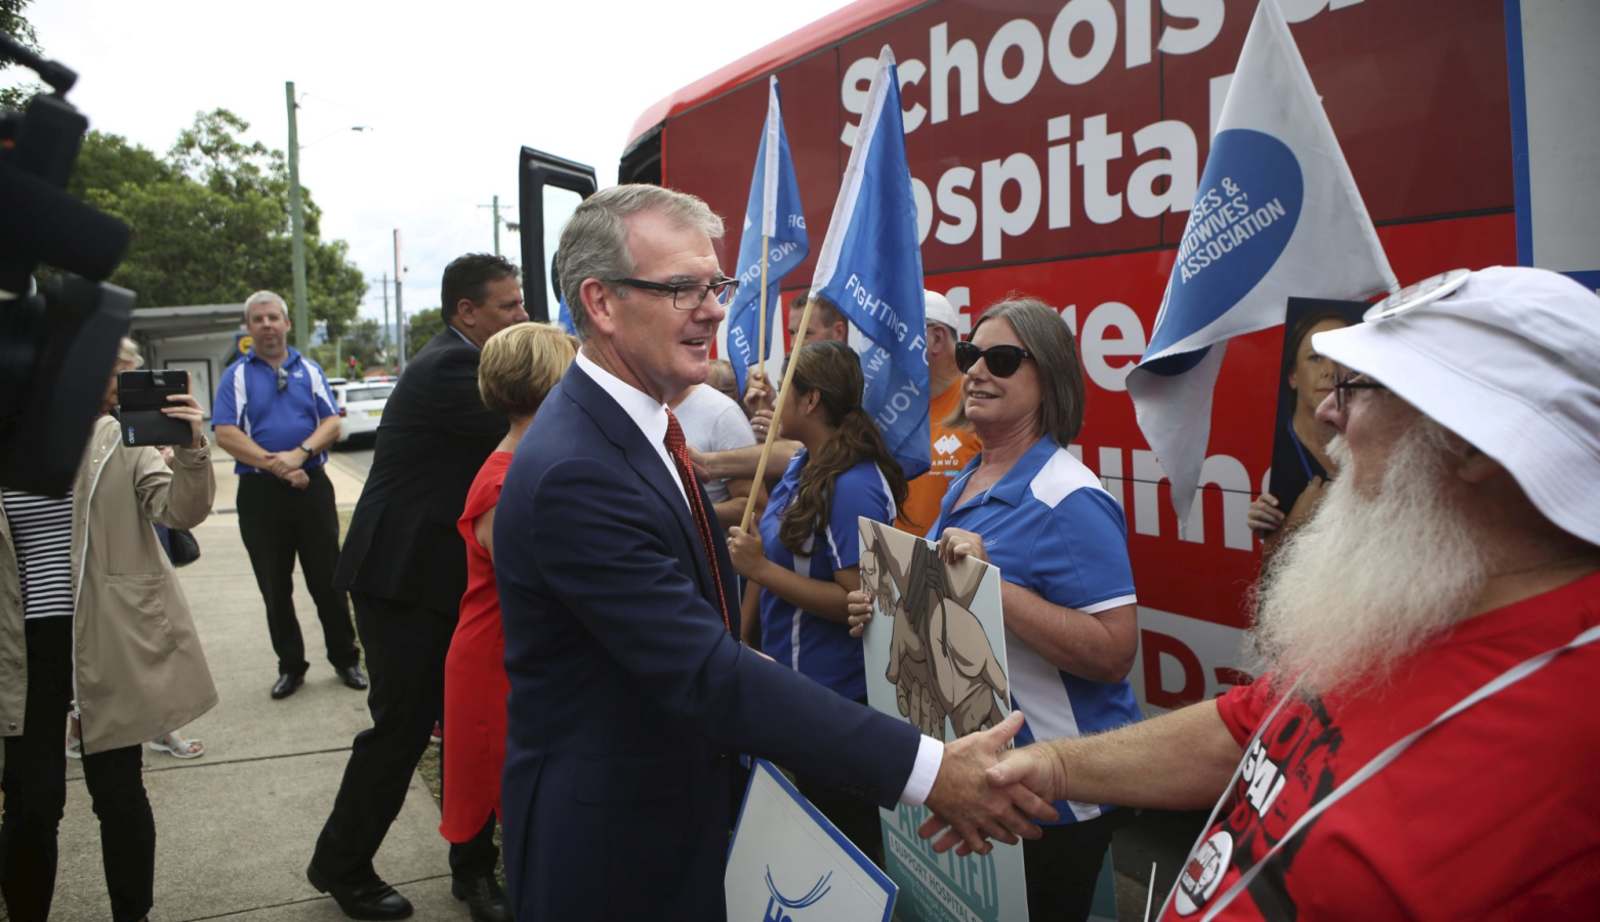 NSW Labor Opposition Leader Michael Daley gets a warm reception from HSU members at Nepean Hospital in Sydney's outer Western suburbs prior to tomorrow's State Election. 